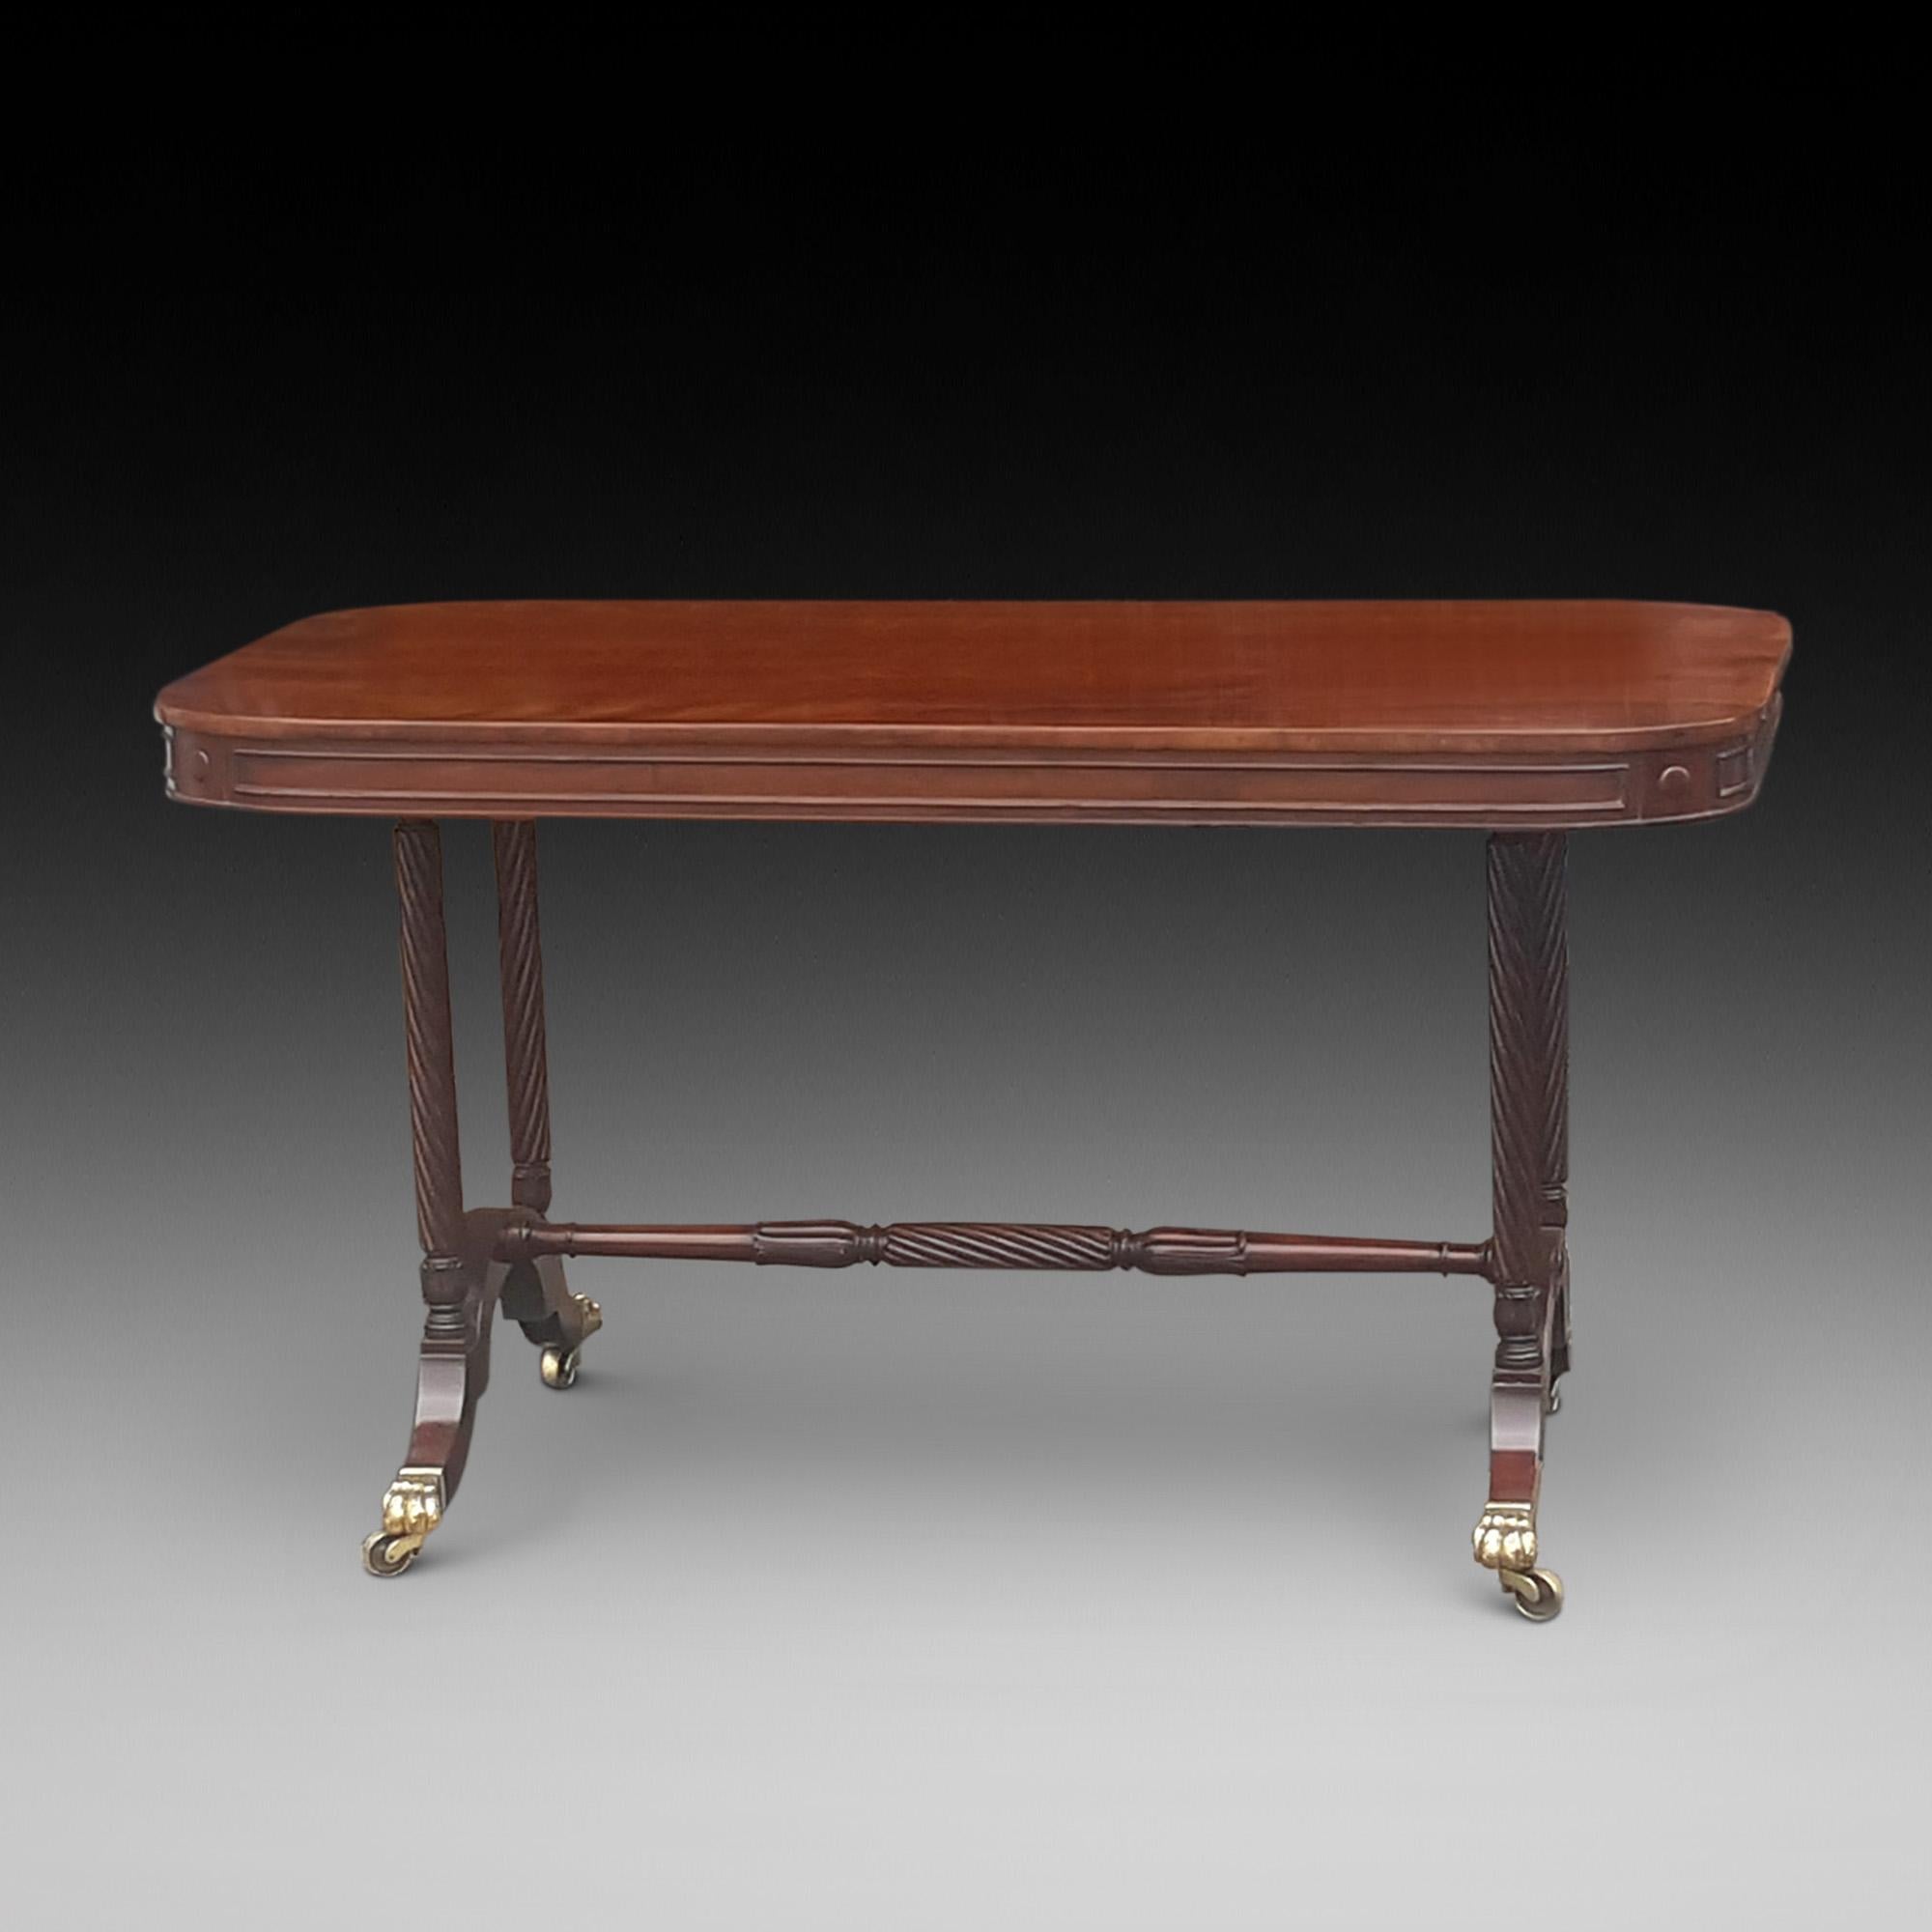 Regency mahogany library table by Gillows with rope twist and acanthus leaf carved end supports and stretcher with sabre legs leading to brass lion paw castors, Stamped 